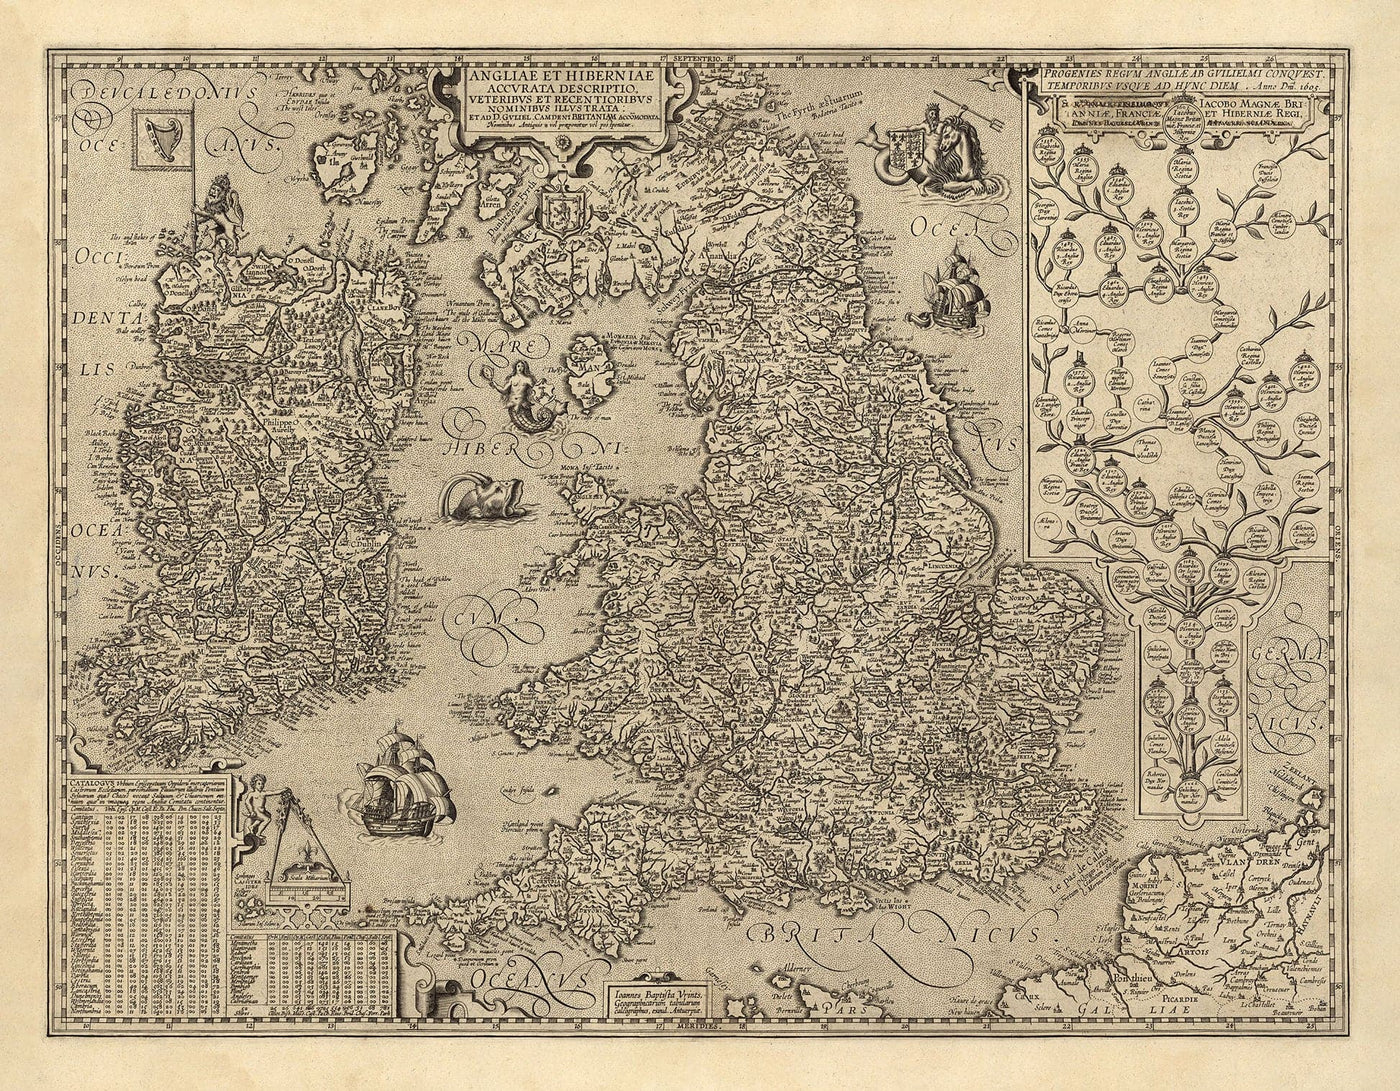 Old Map of England & Ireland in 1605 by Abraham Ortelius